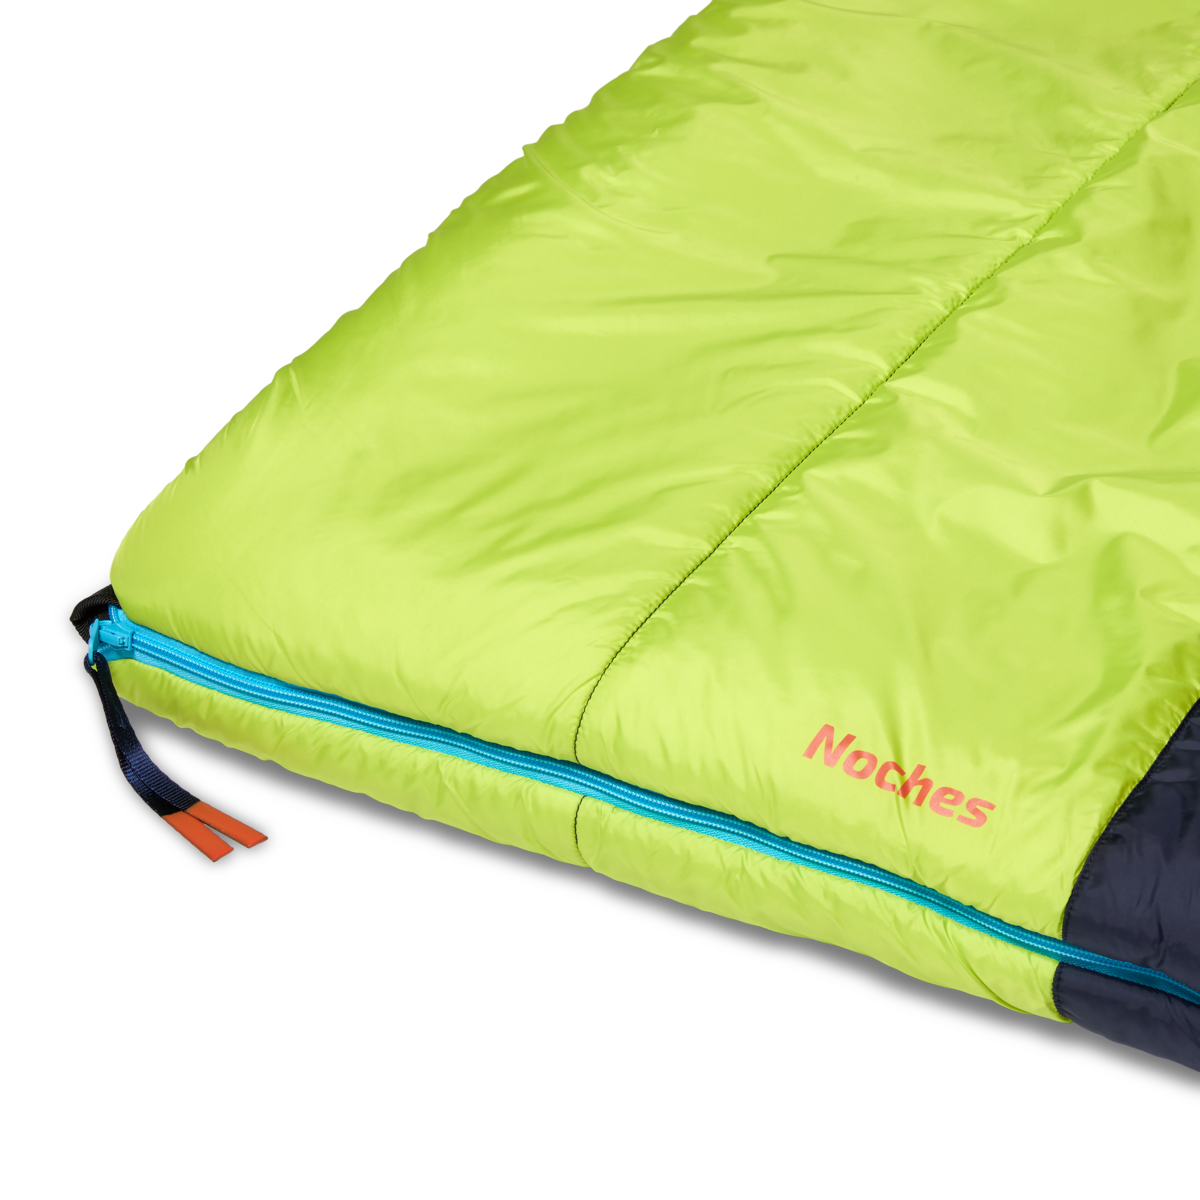 products/1200x1200png-SummerCamp_noches_sleeping_bag_maui_detail2.png